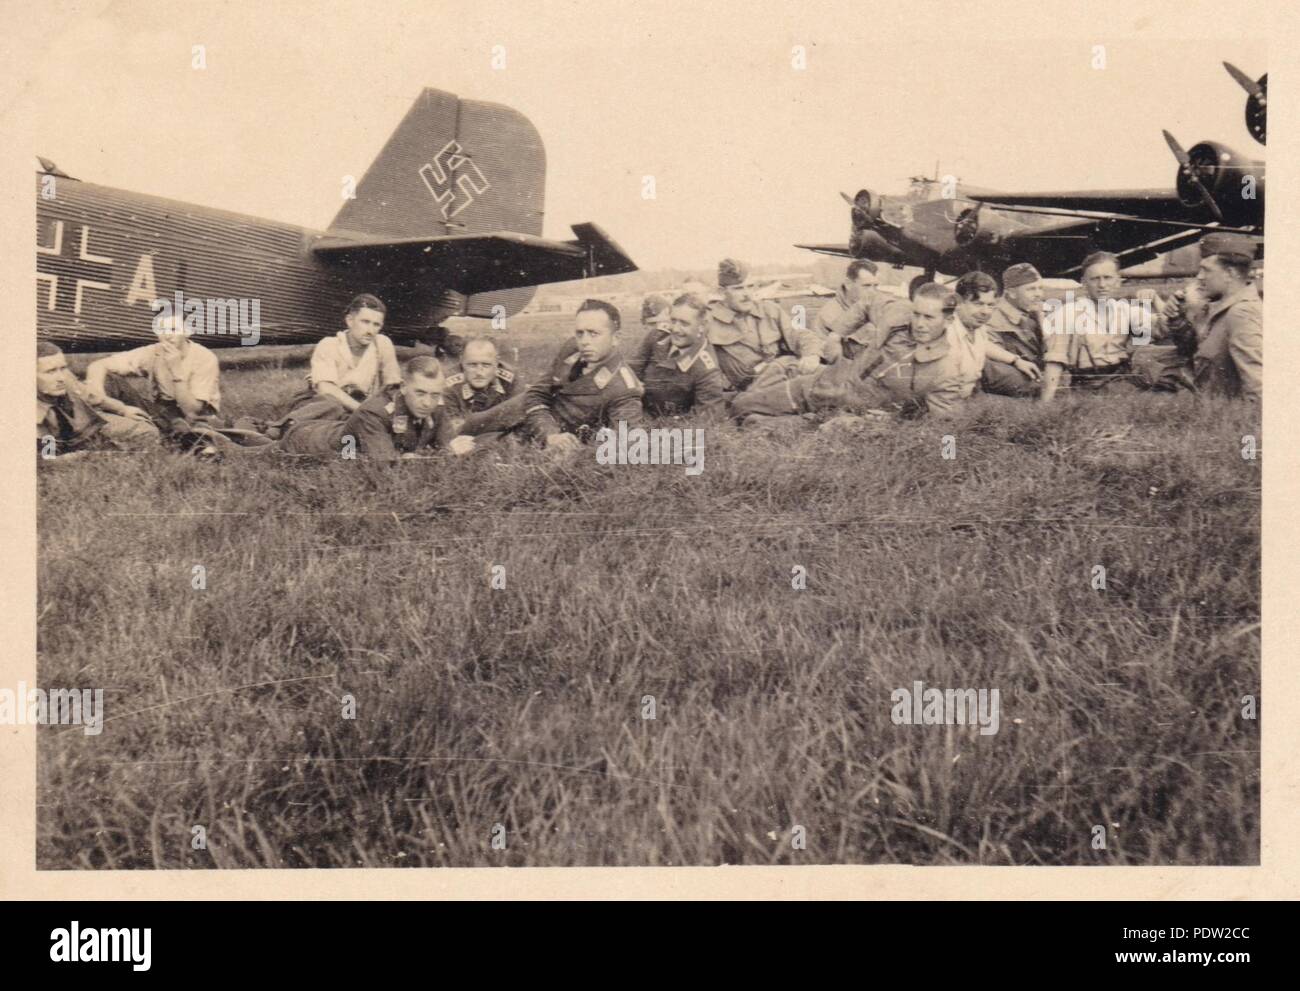 Image from the photo album of Oberfeldwebel Karl Gendner of 1. Staffel, Kampfgeschwader 40: Karl Gendner (fourth from right) and other transport crewmen from 3./KGzbV 9 relax between missions beside their Junkers Ju52/3m transport aircraft at Deblin Airfield, Poland in September 1939. Stock Photo